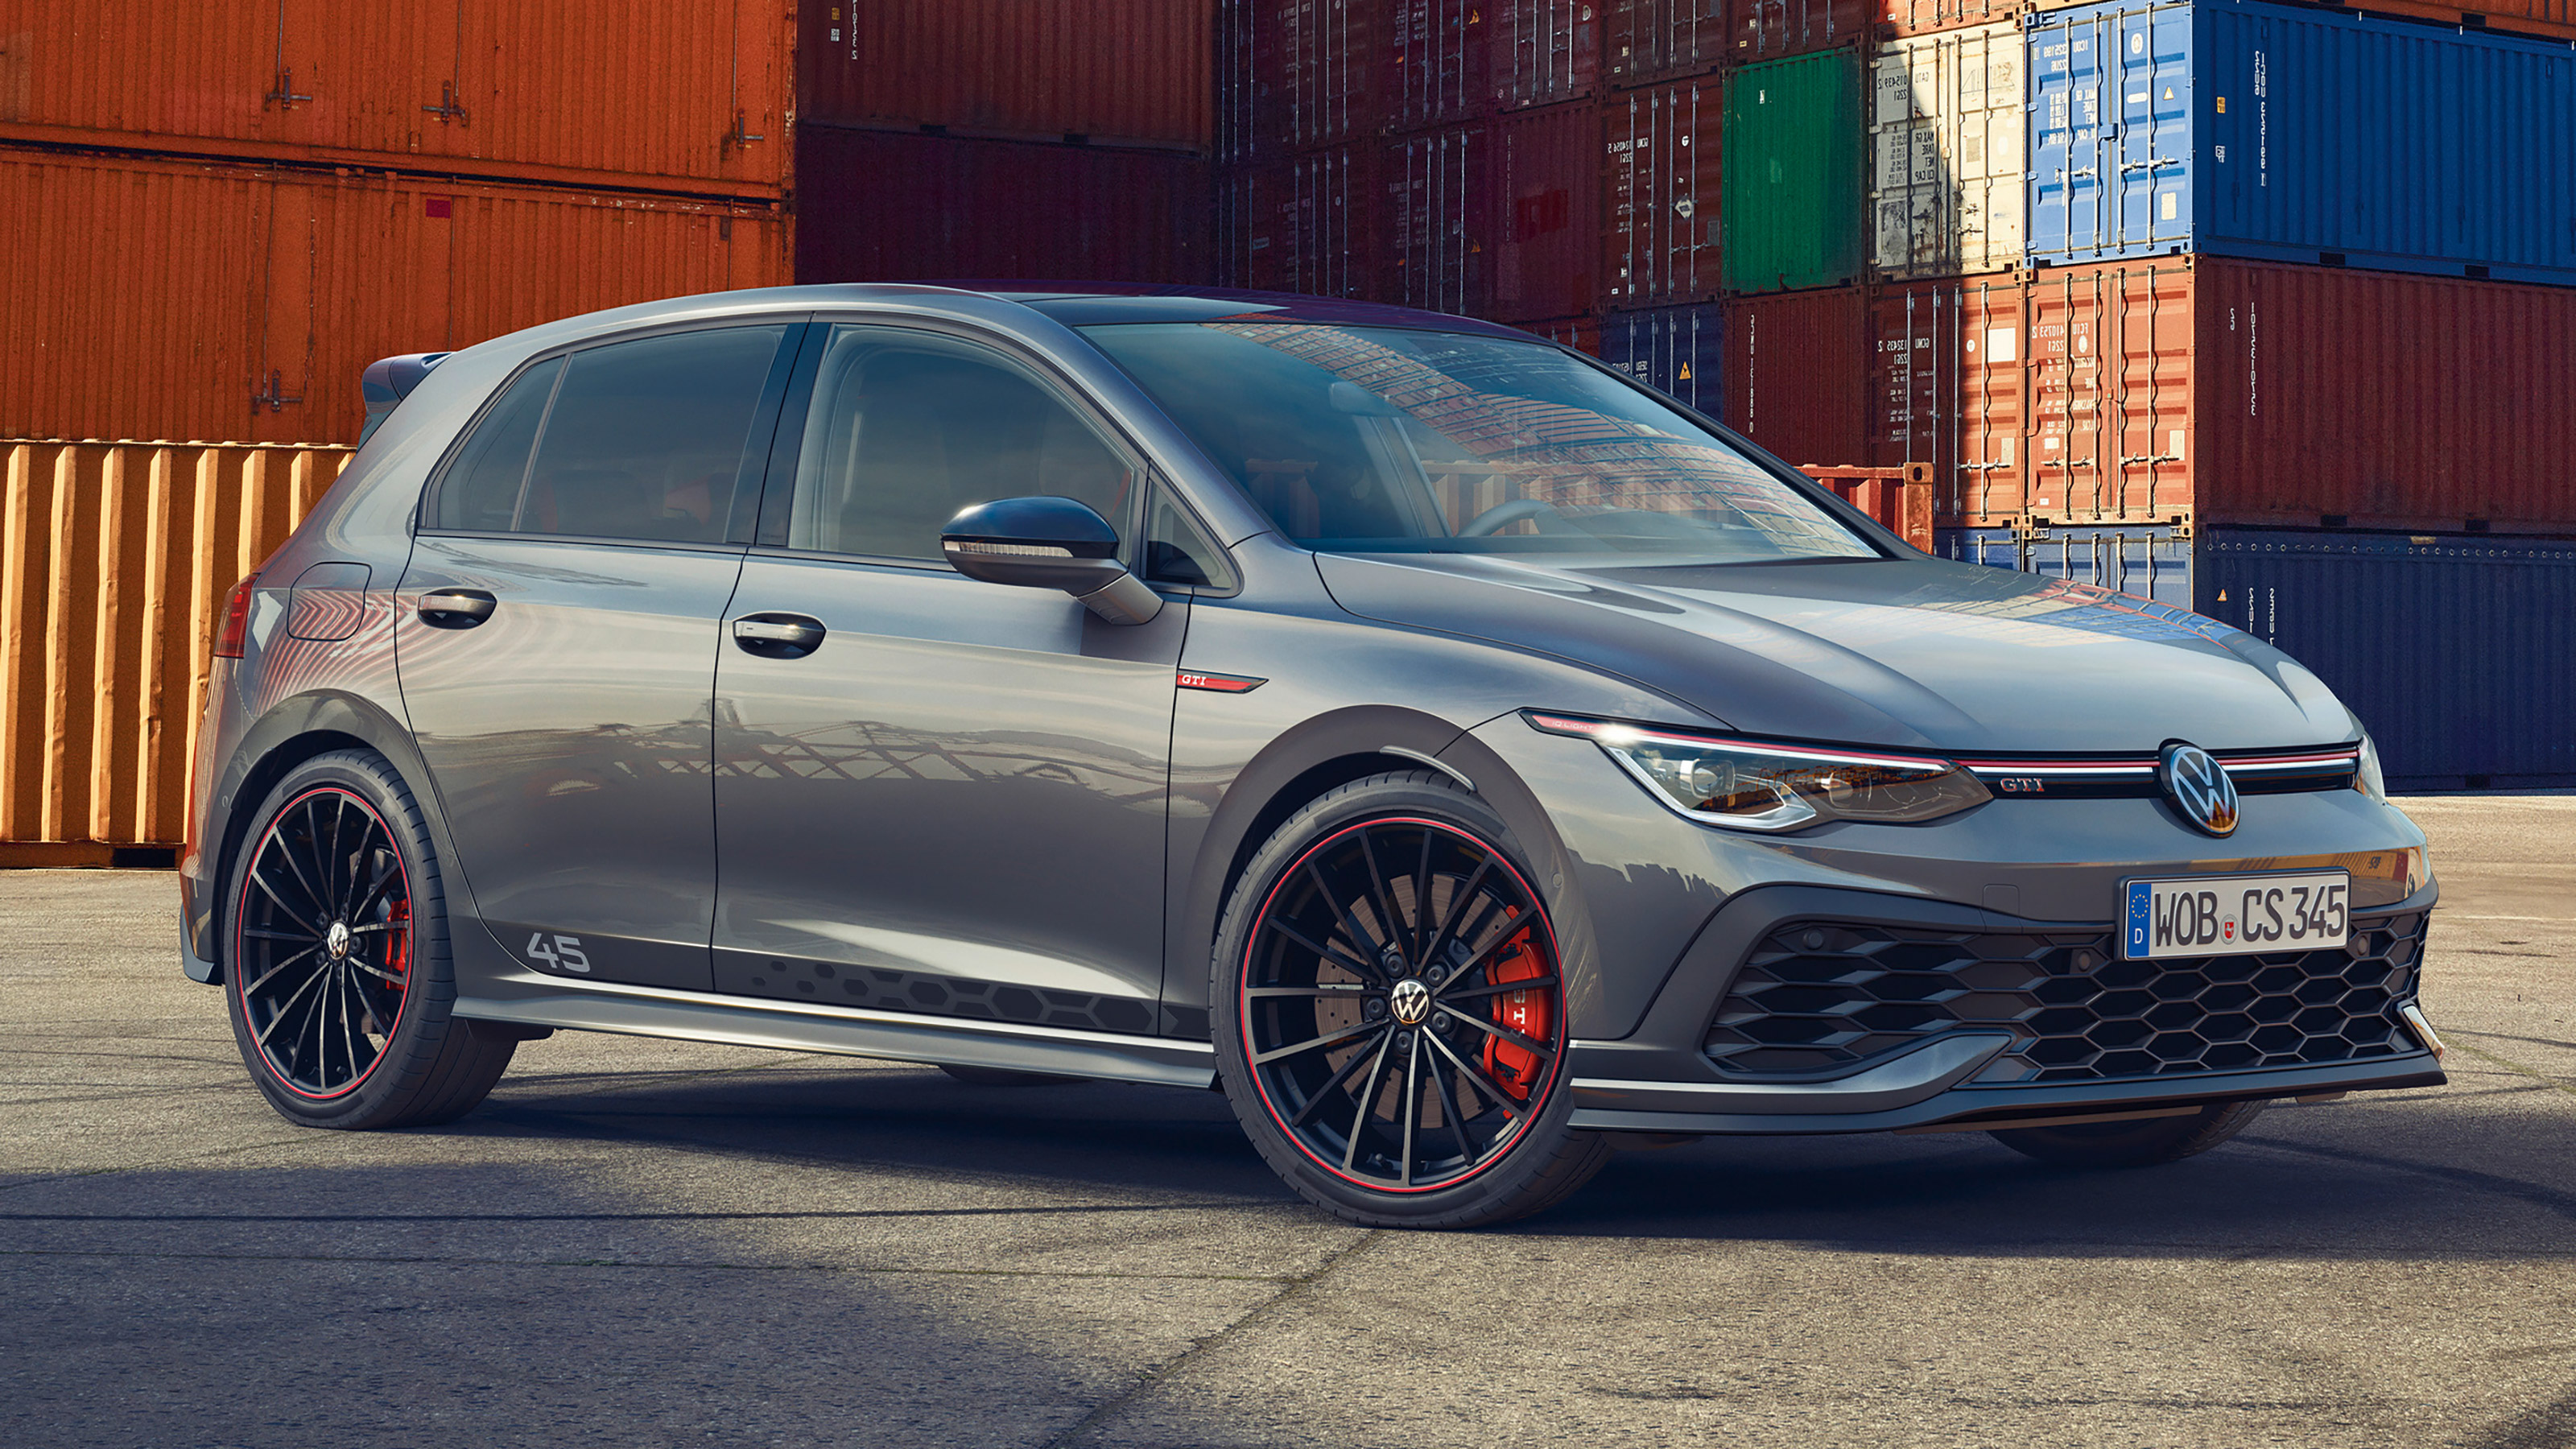 Volkswagen Golf Gti Clubsport 2021 Review Has The Honda Civic Type R Been Usurped Evo